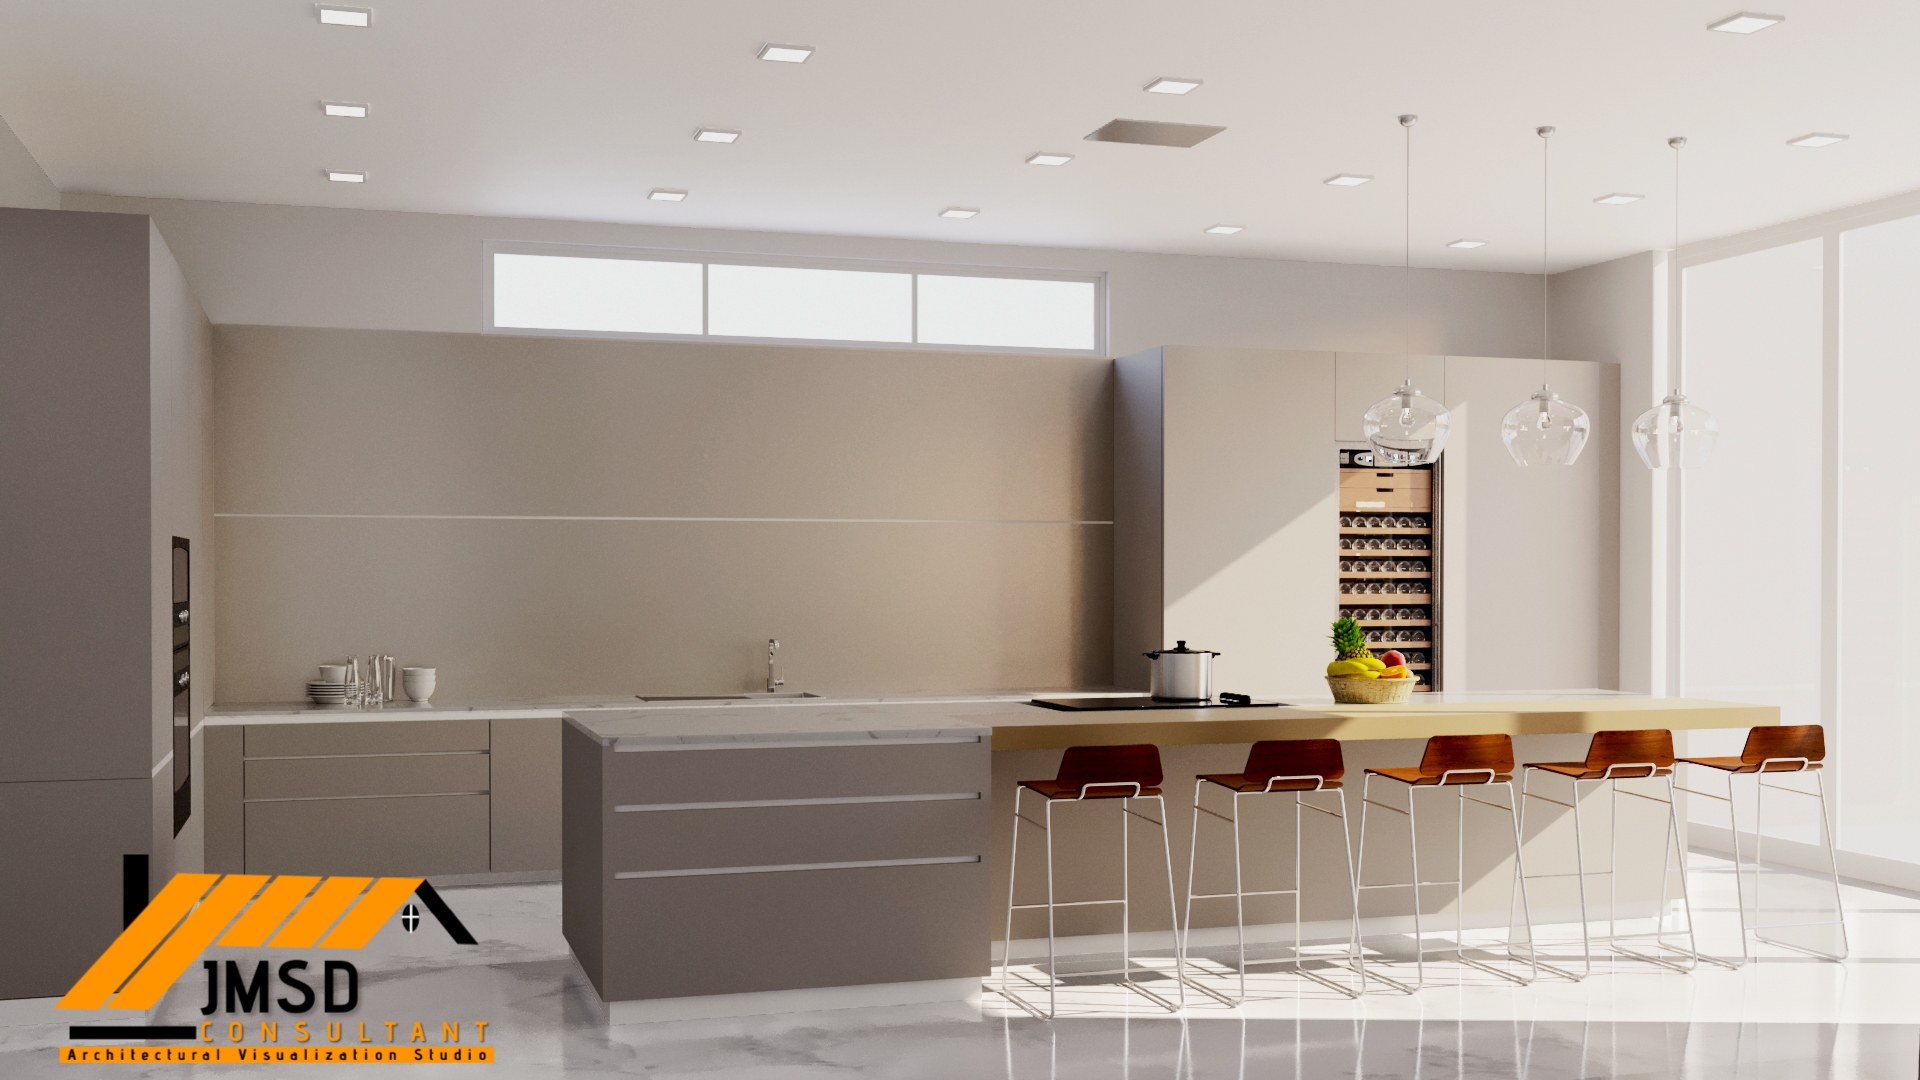 3D Kitchen Rendering Services Pennsylvania This is a kitchen rendering services Project in Pennsylvania By JMSD Consultant rendering Studio and Hyper-realistic Furniture Modeling and many more in creative CGI field. by JMSDCONSULTANT